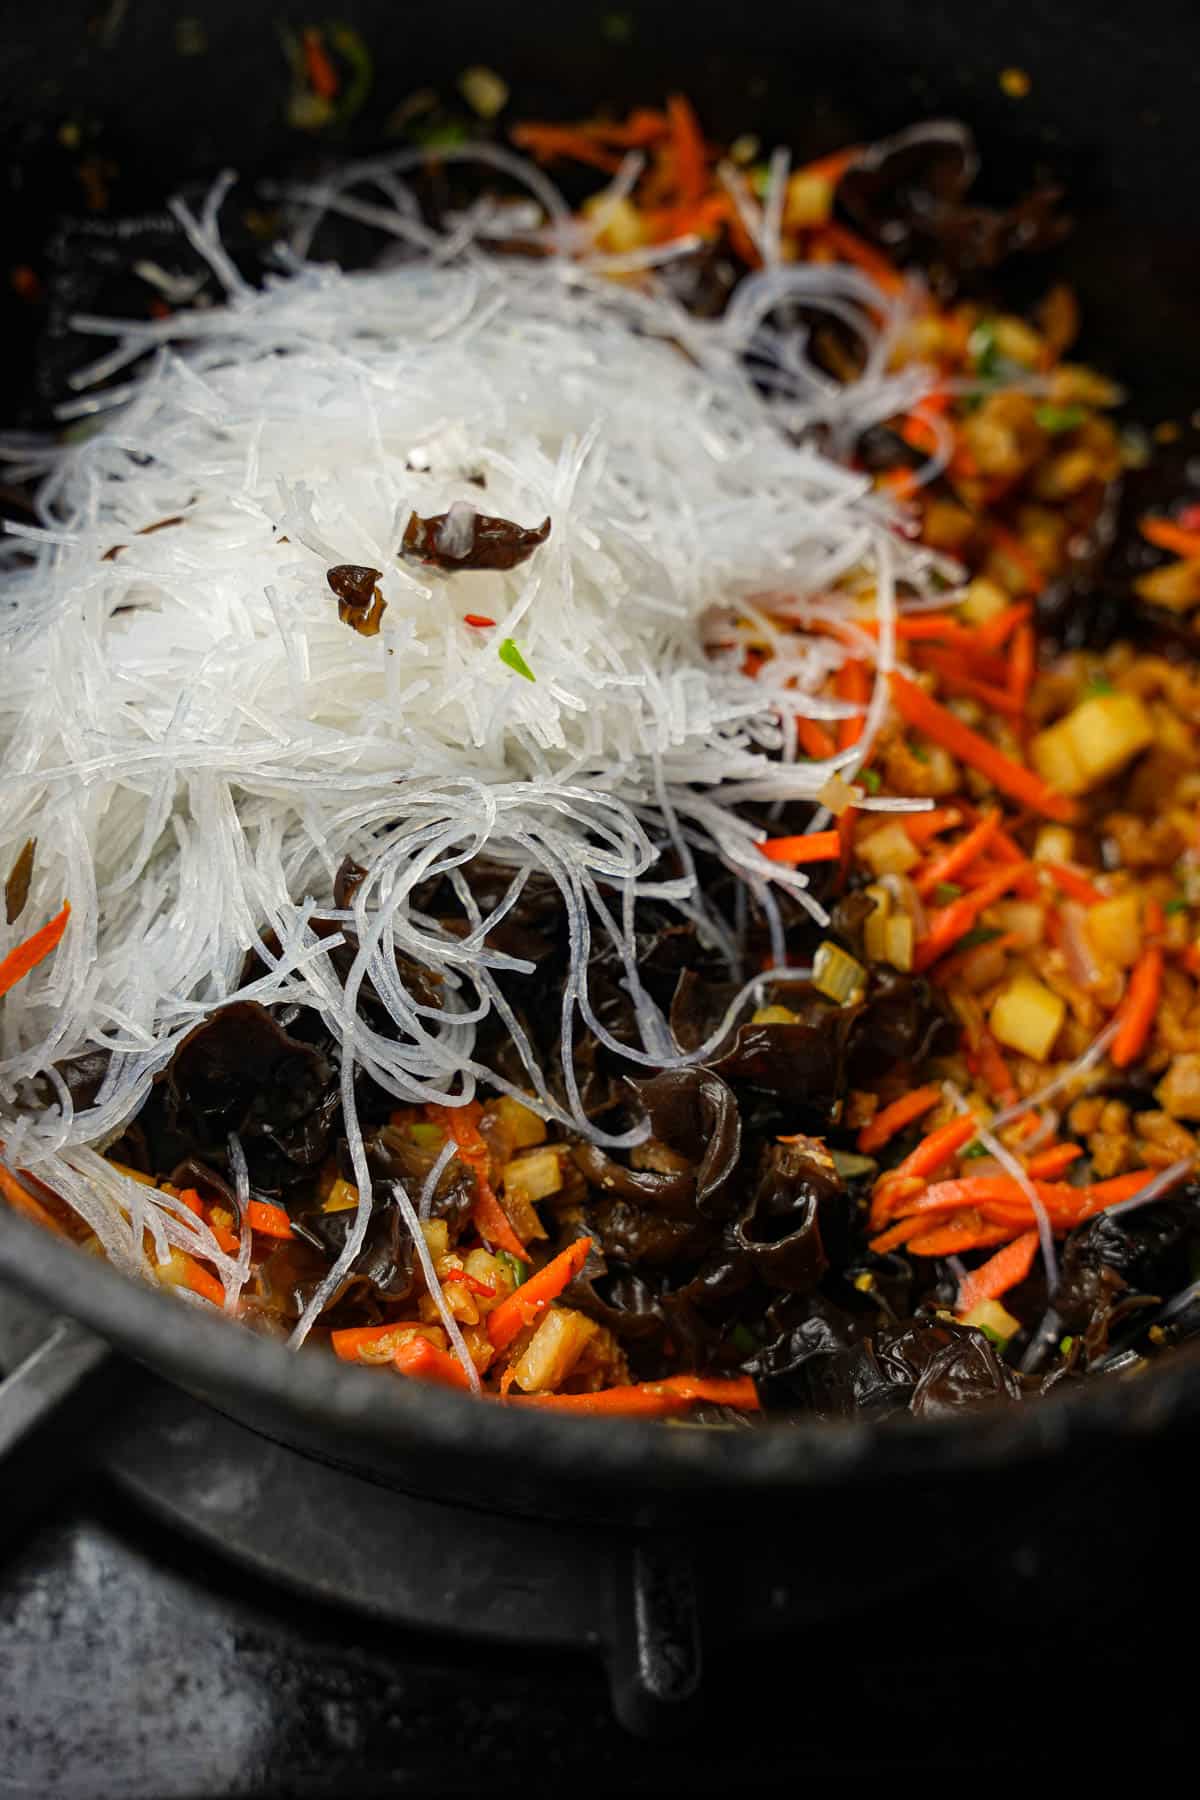 Black fungus, sauces, and noodles are added to the sauteeing veggies in a pan.